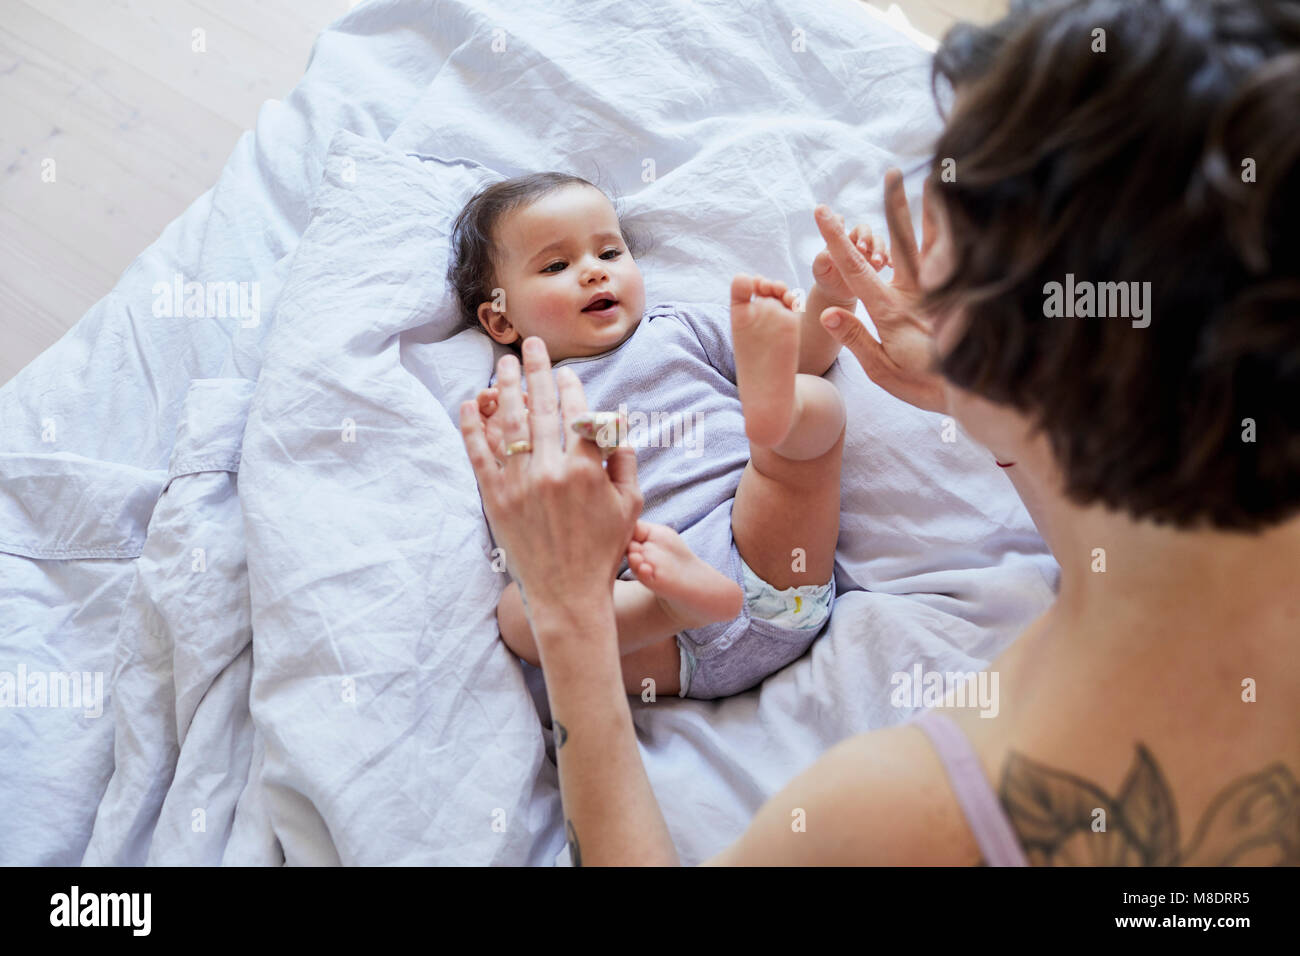 Baby girl lying on bed, mother looking over her, playing Stock Photo